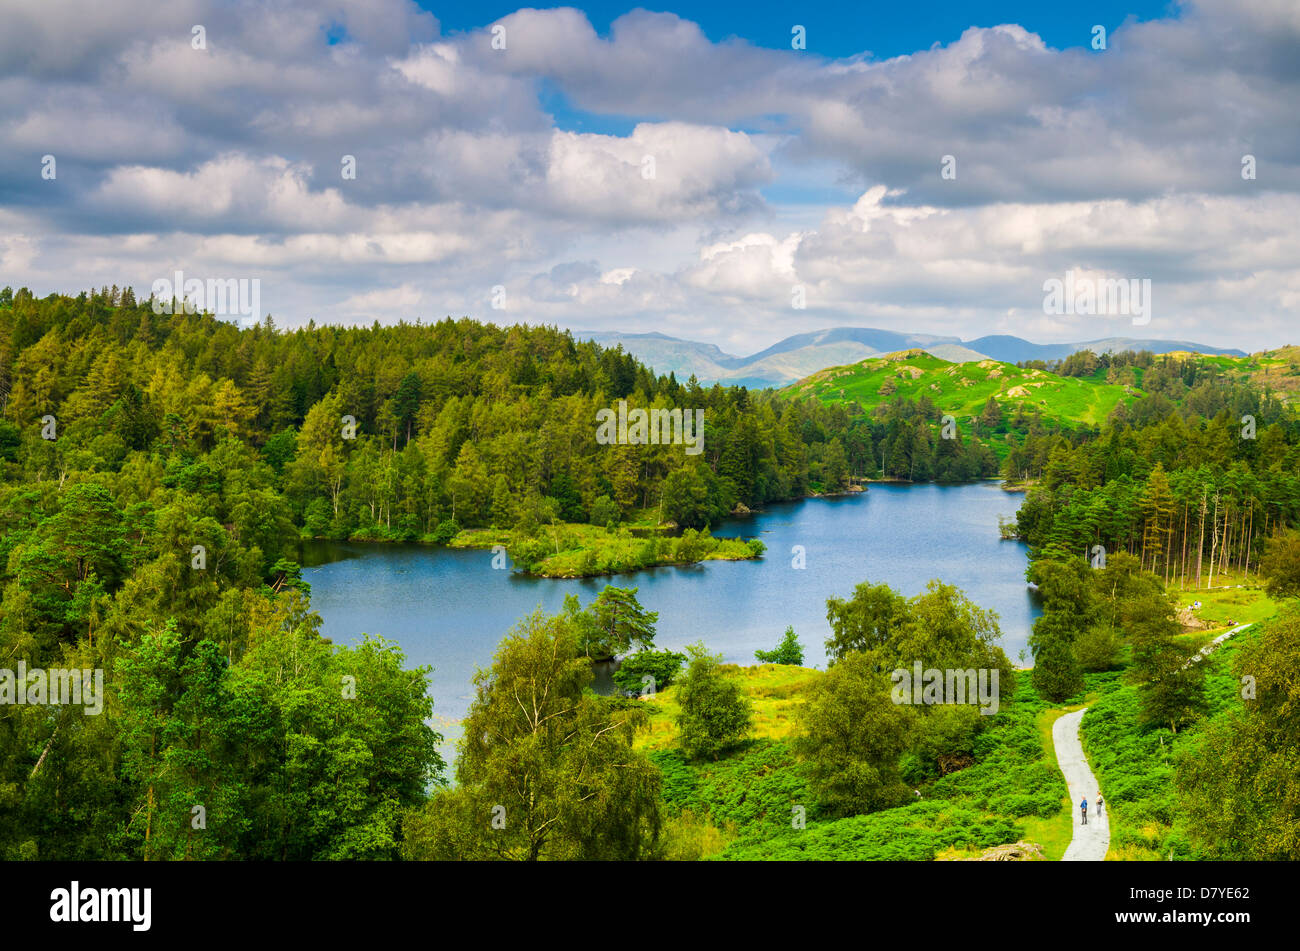 Tarn Hows surrounded by forest in the Lake District near Coniston, Cumbria, England. Stock Photo